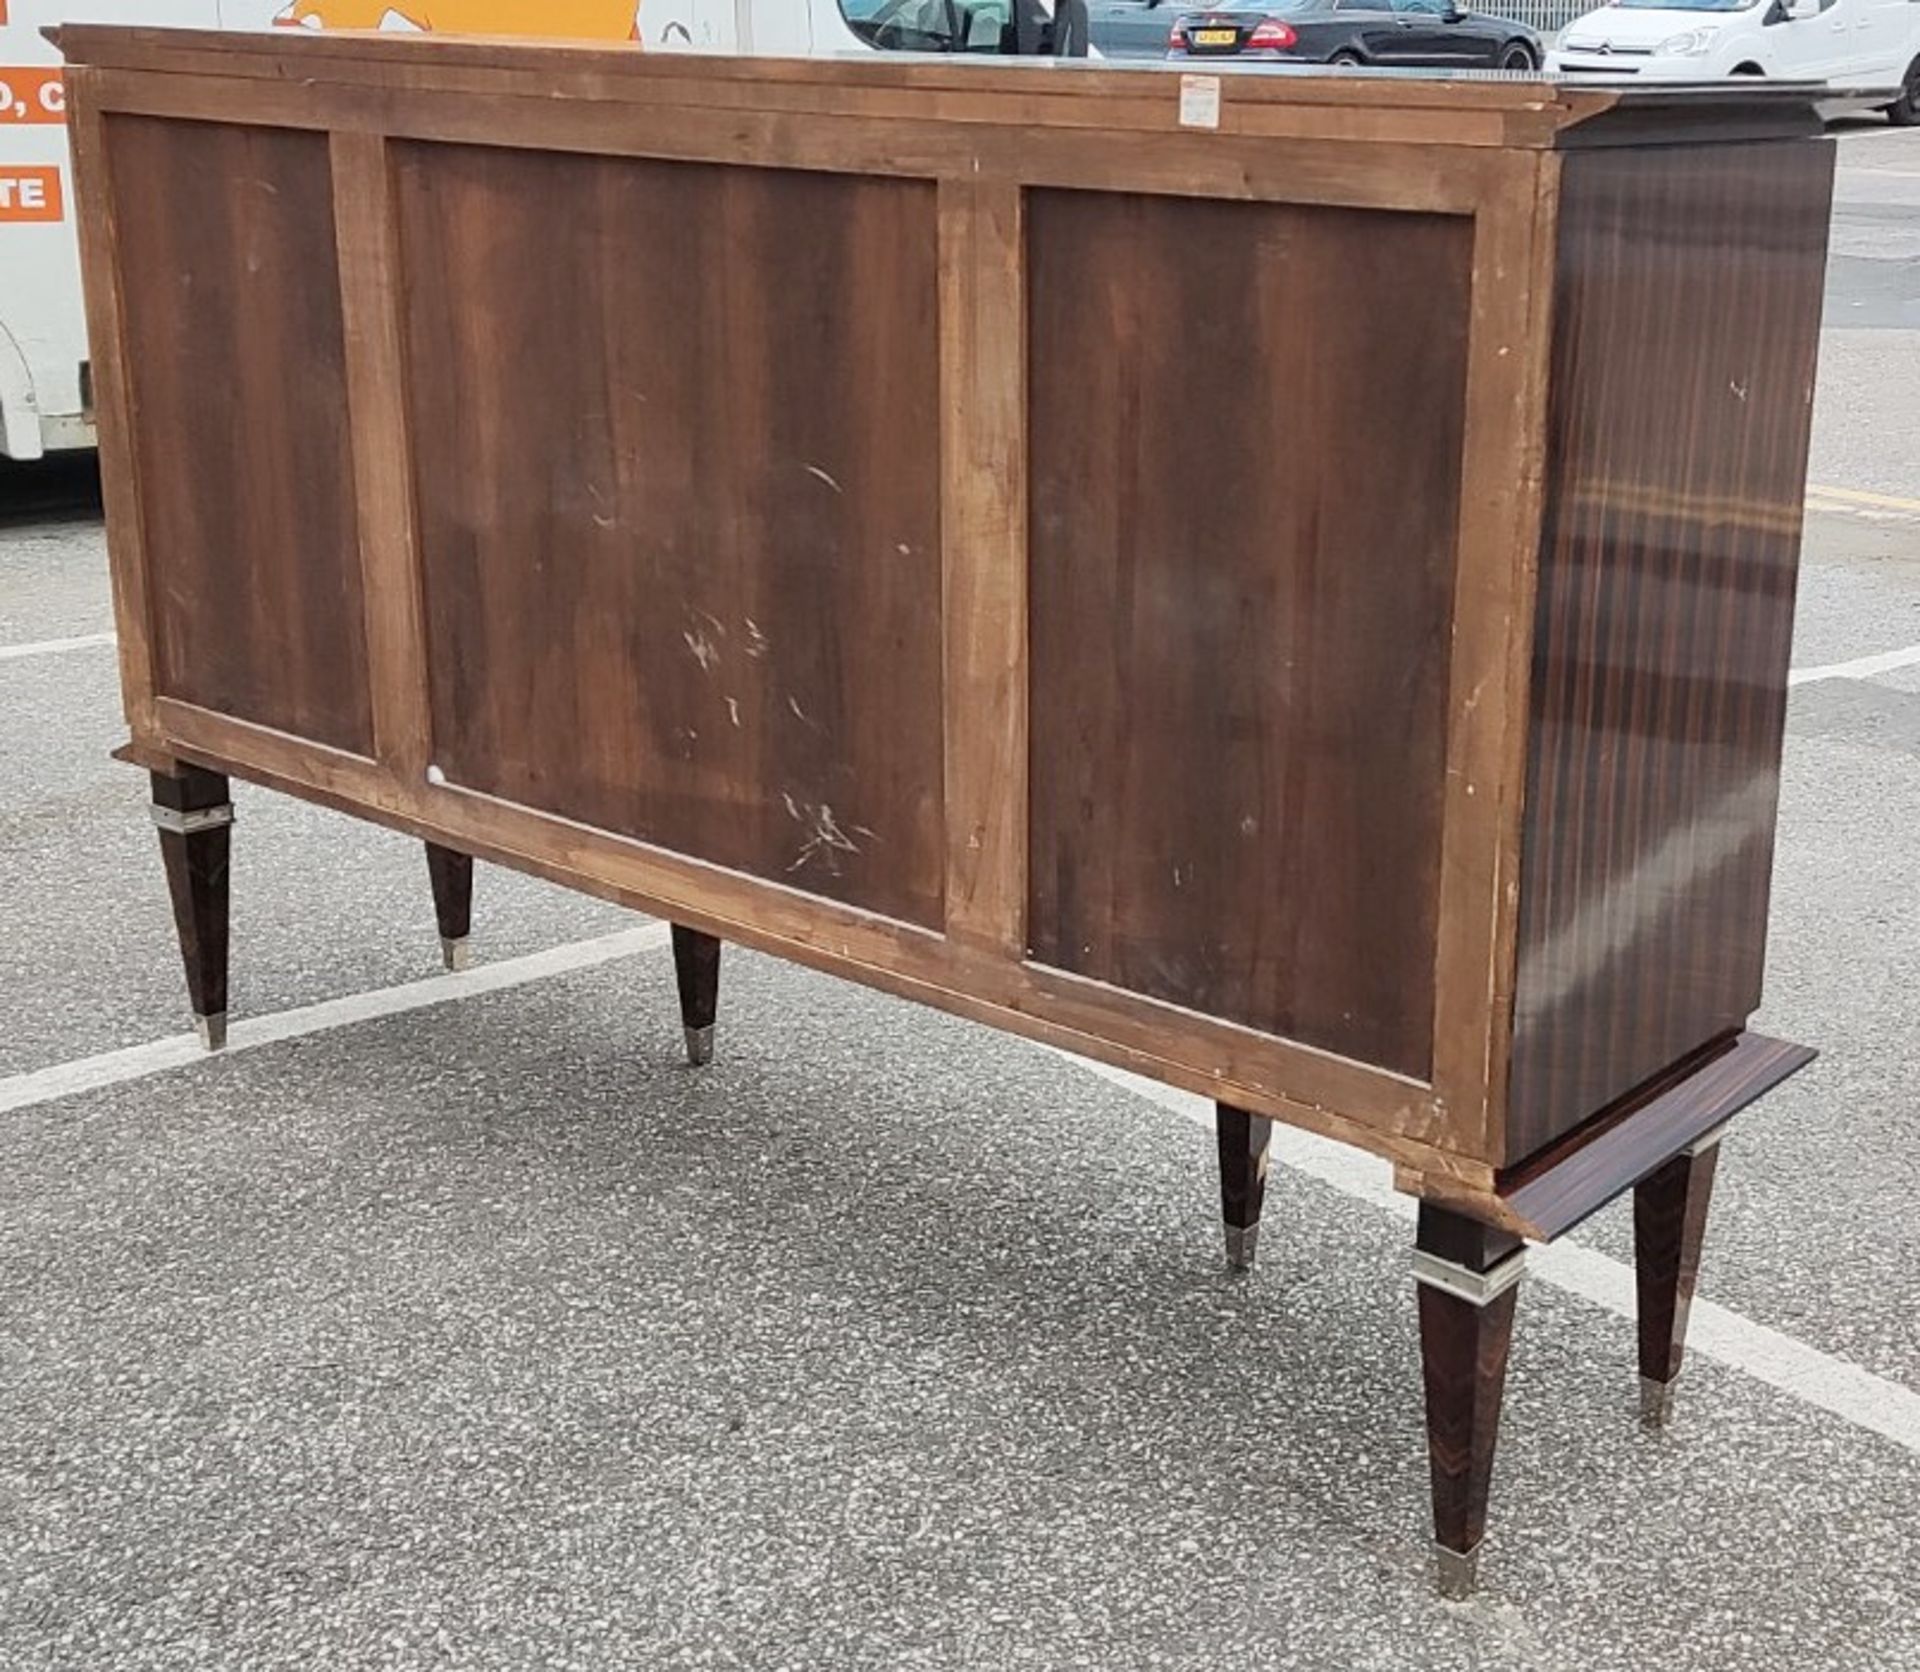 1 x MAURICE RINCK-Inspired Art Deco Four Door Sideboard With 6 Silver Embellished Feet - Image 2 of 13